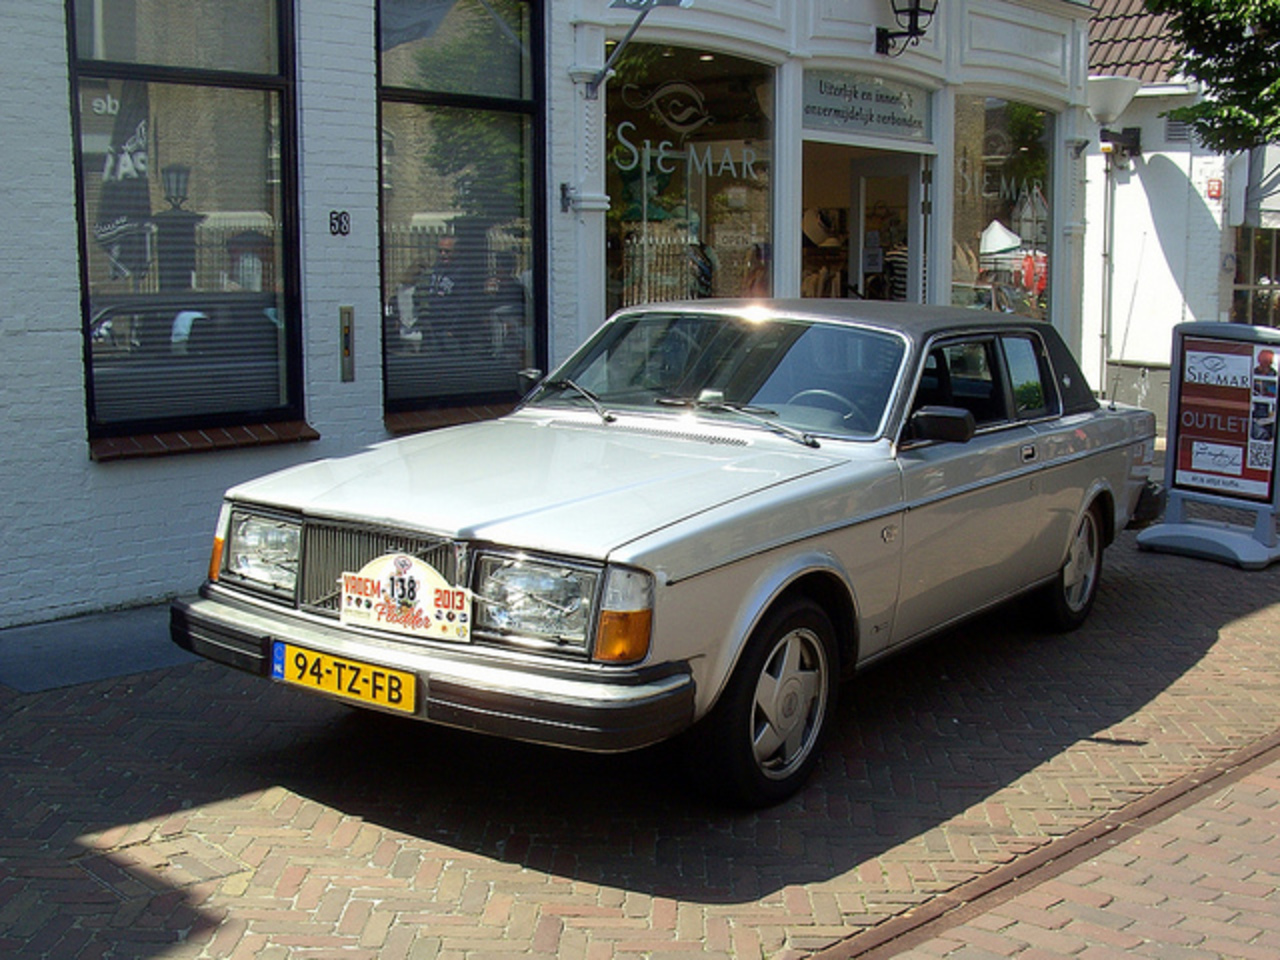 Flickr: The Volvo 262 and any other Volvo 260 series Bertone cars Pool